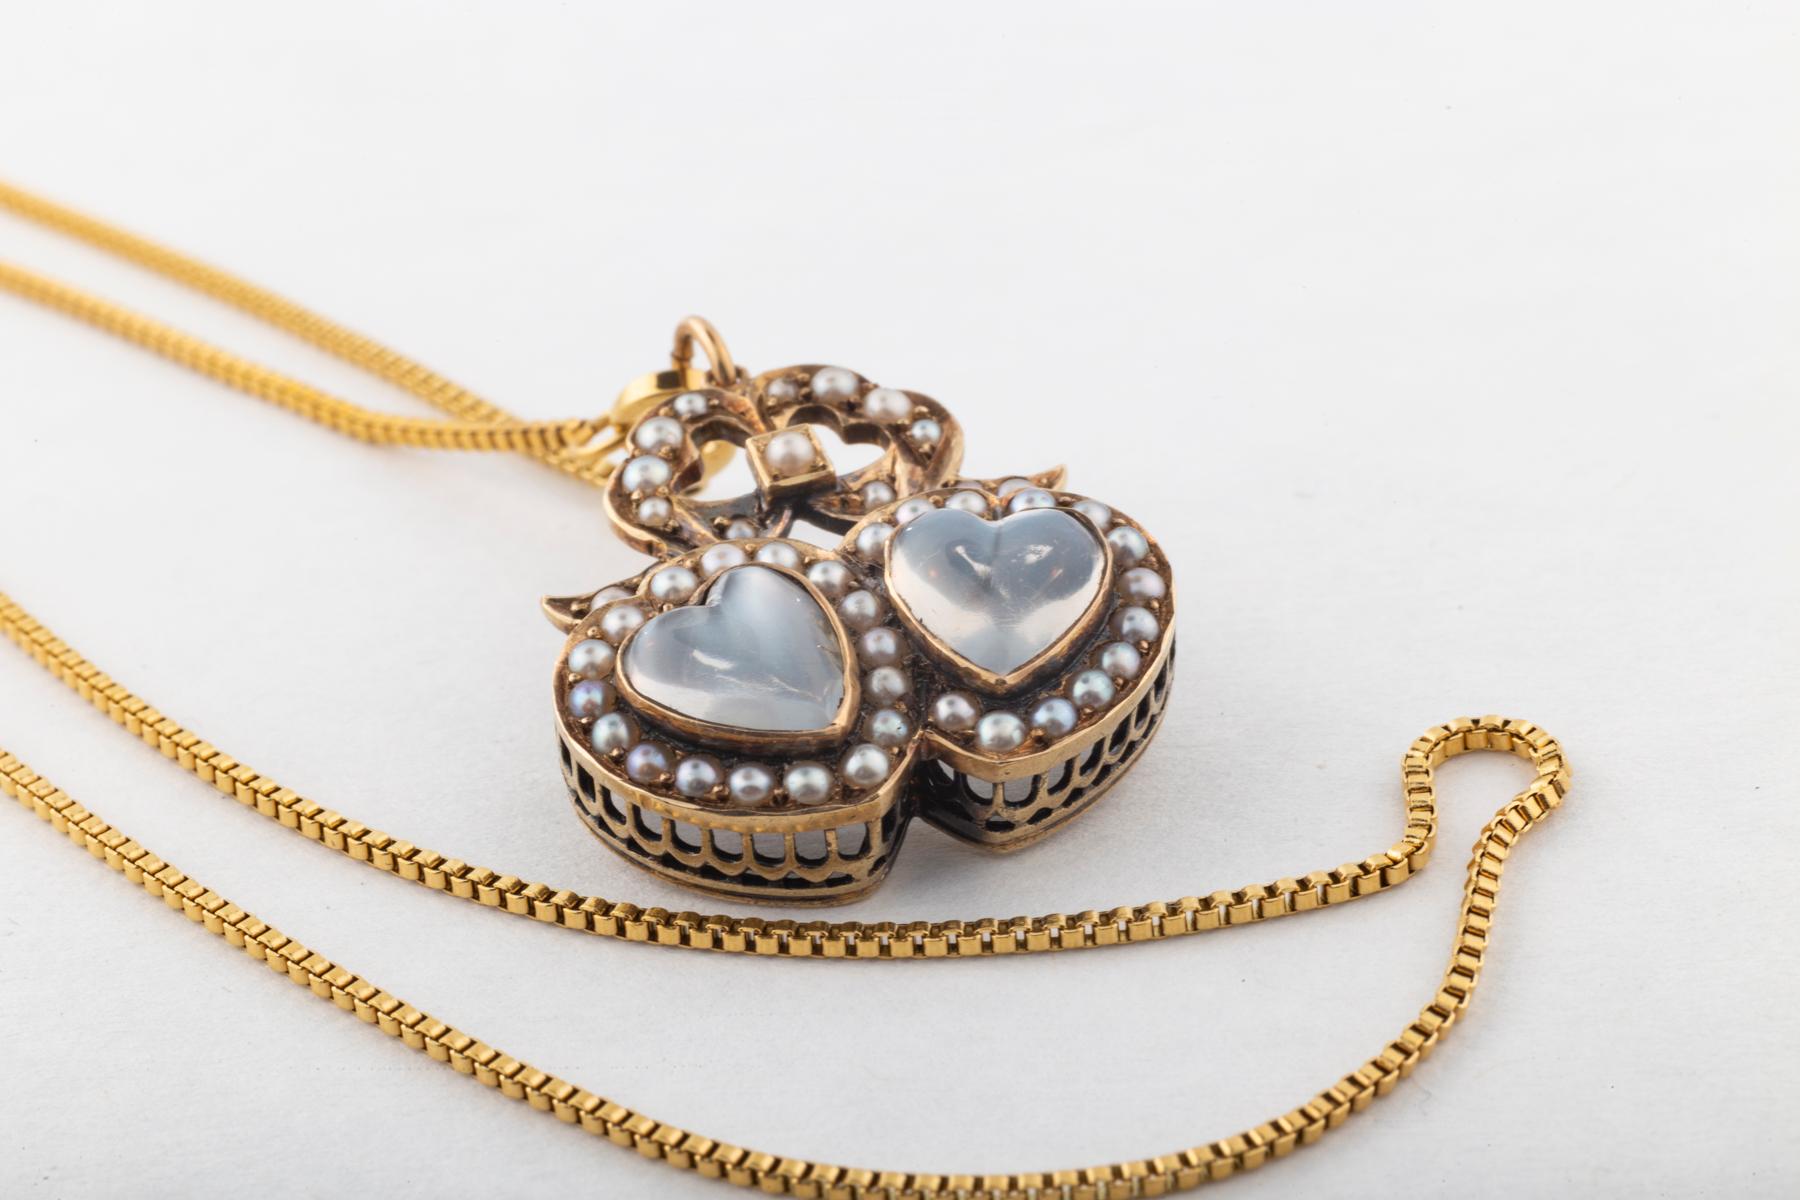 A brooch with a pendant loop allows this moonstone double heart and pearl jewel to be worn as you choose. On top of the hearts, like a crown is a pearl bow which sends the message 